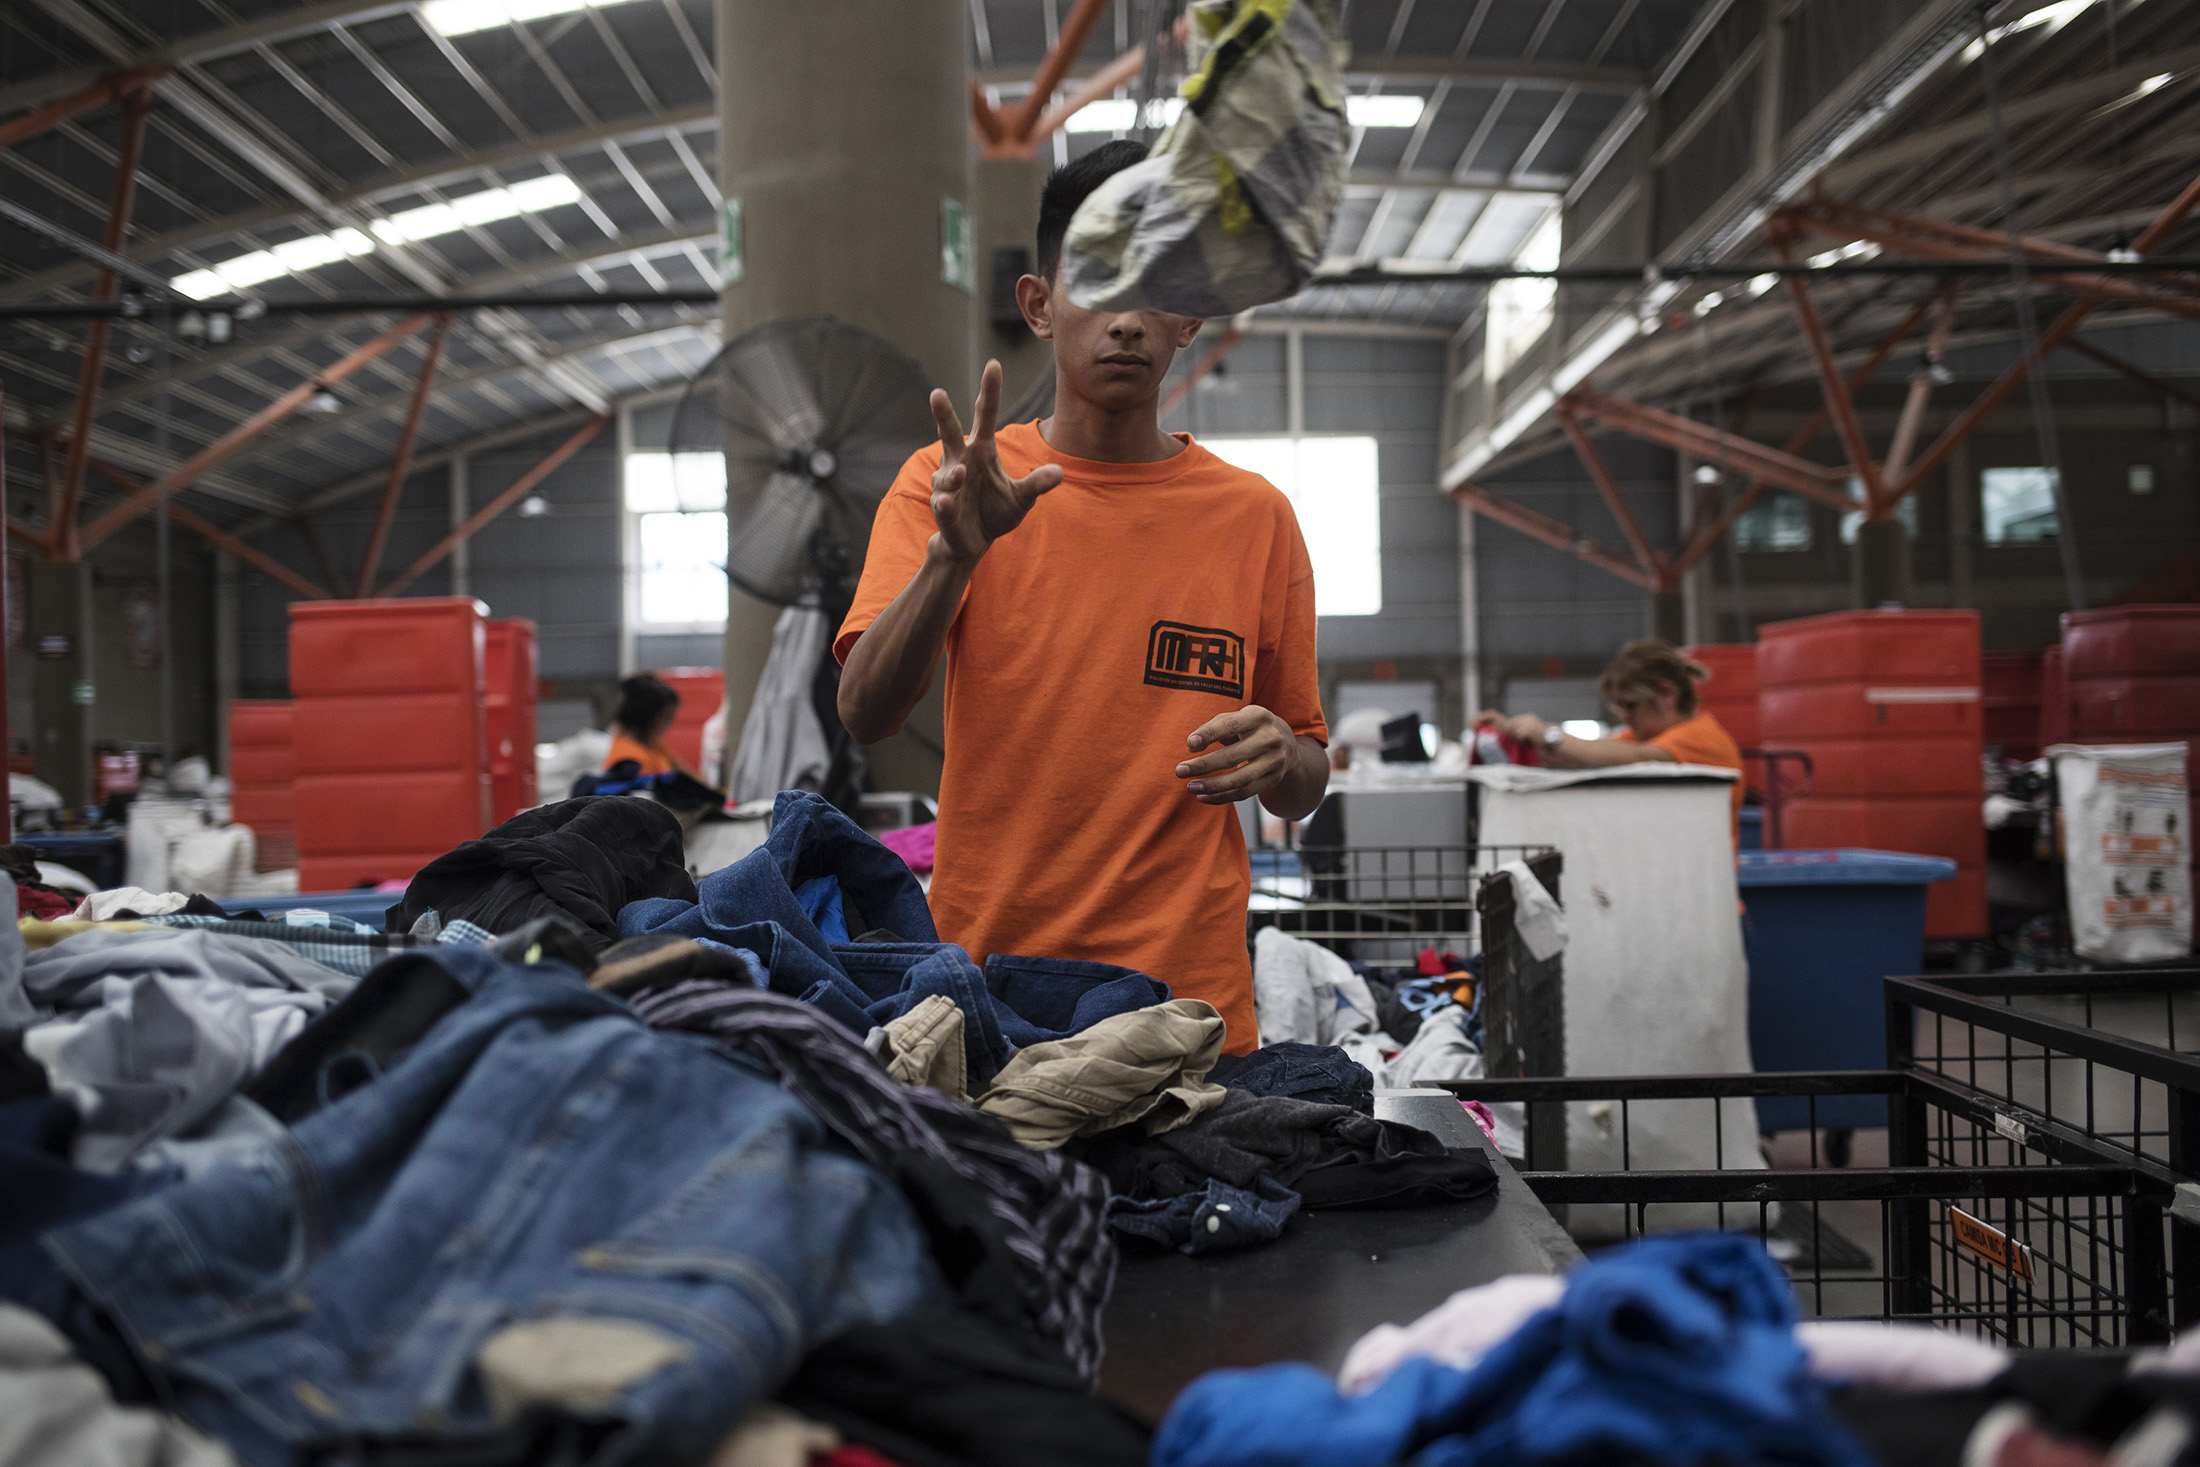 Megapaca Wants to Sell Used Clothing Back to Americans - Bloomberg